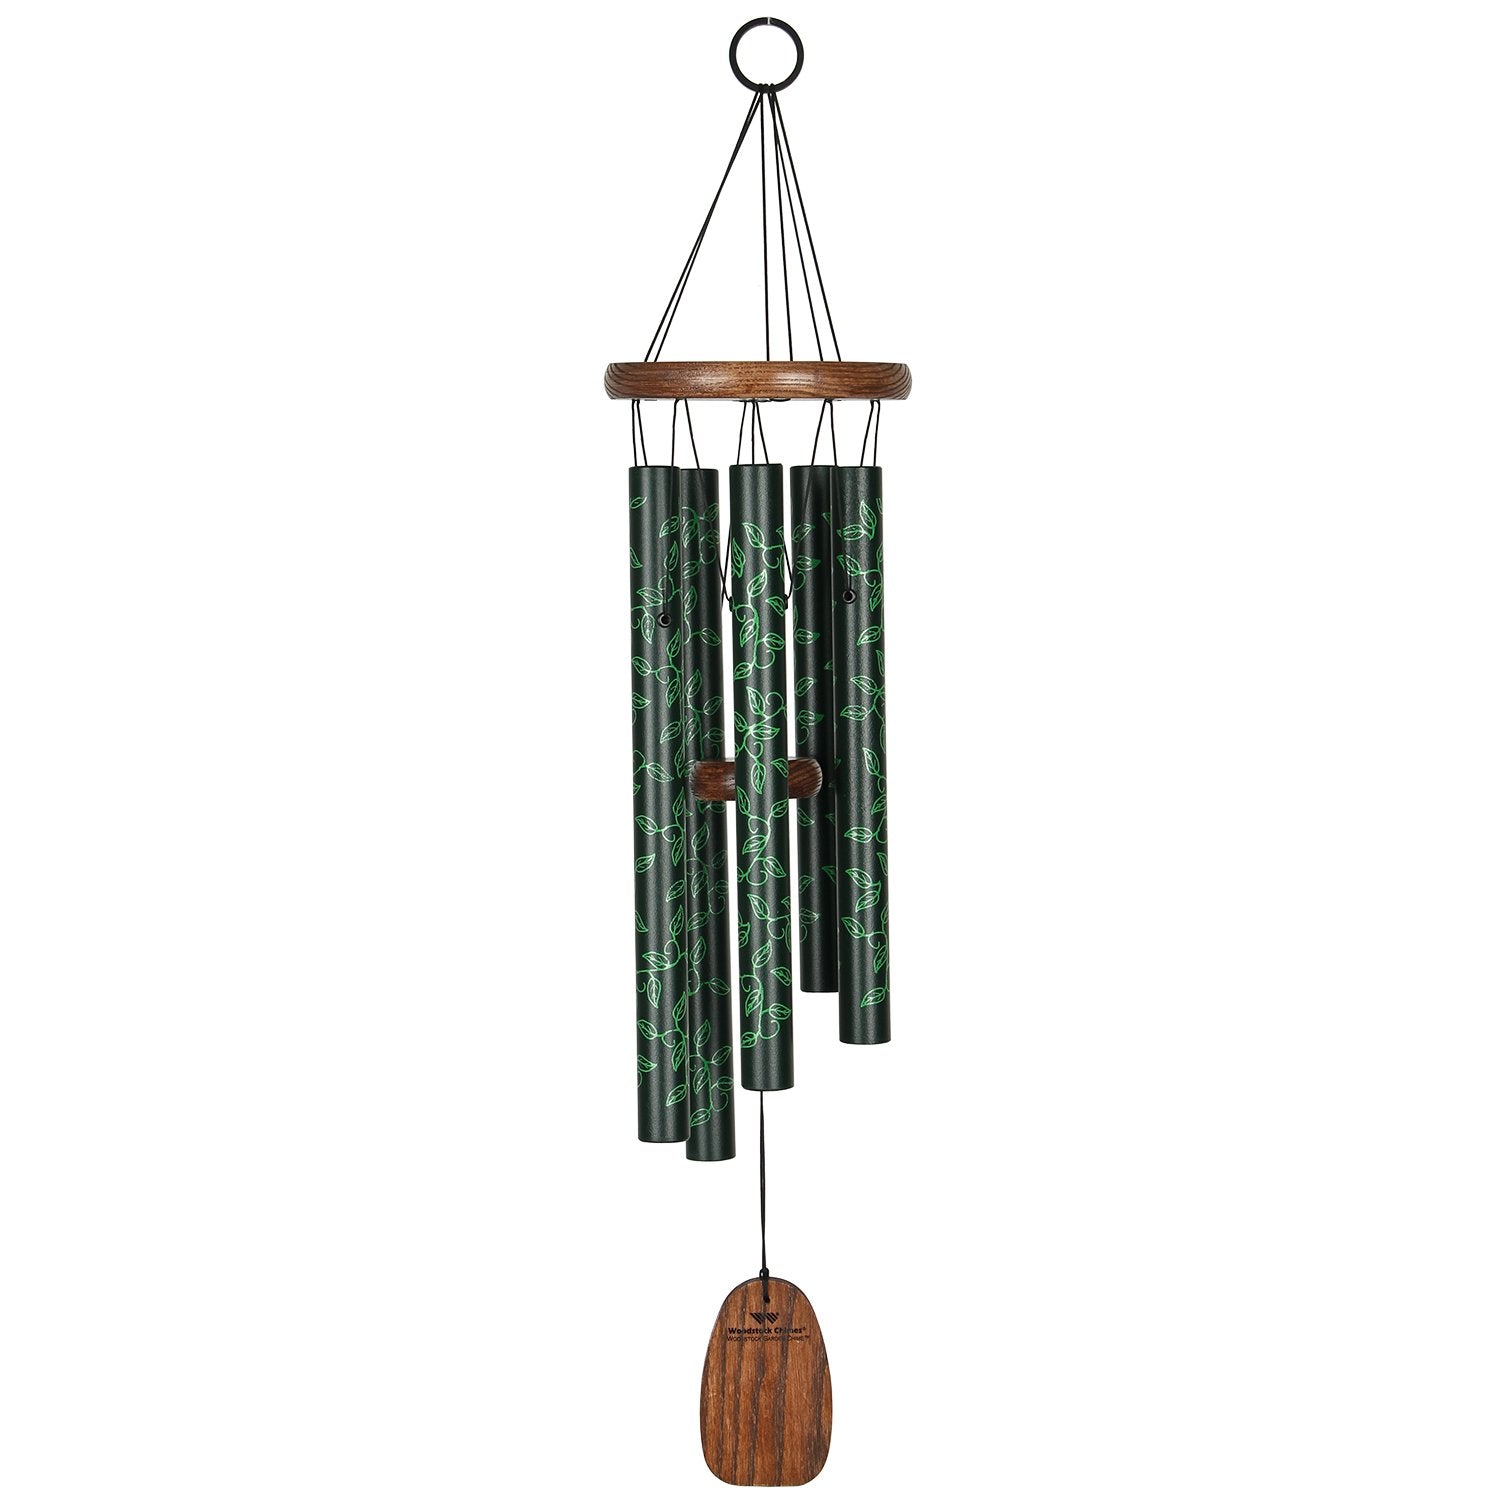 Garden Chime - Ivy full product image